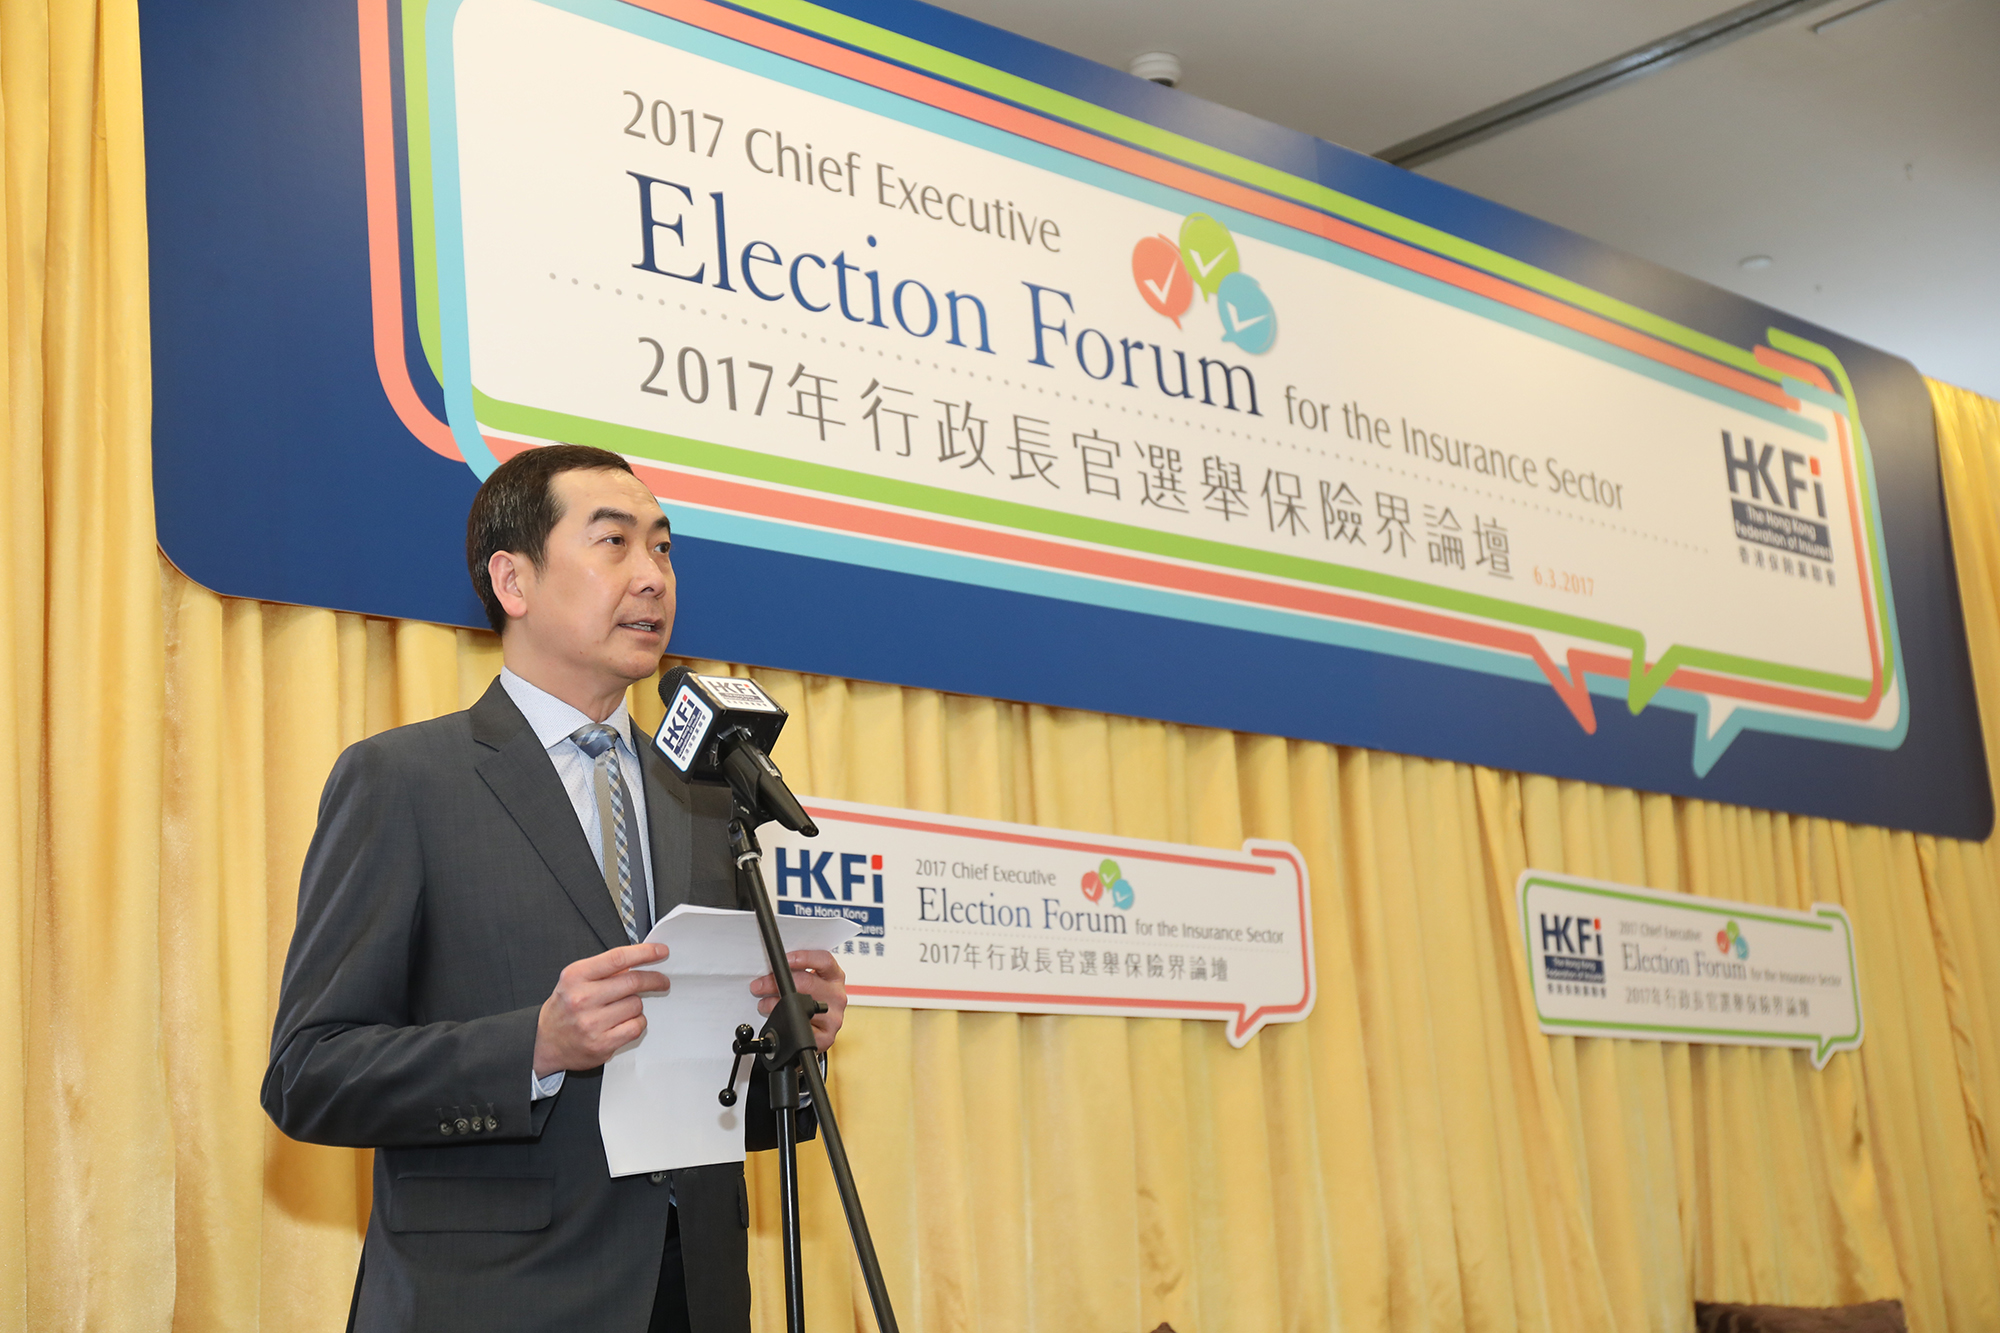 2017 Chief Executive Election Forum for the Insurance Sector videos